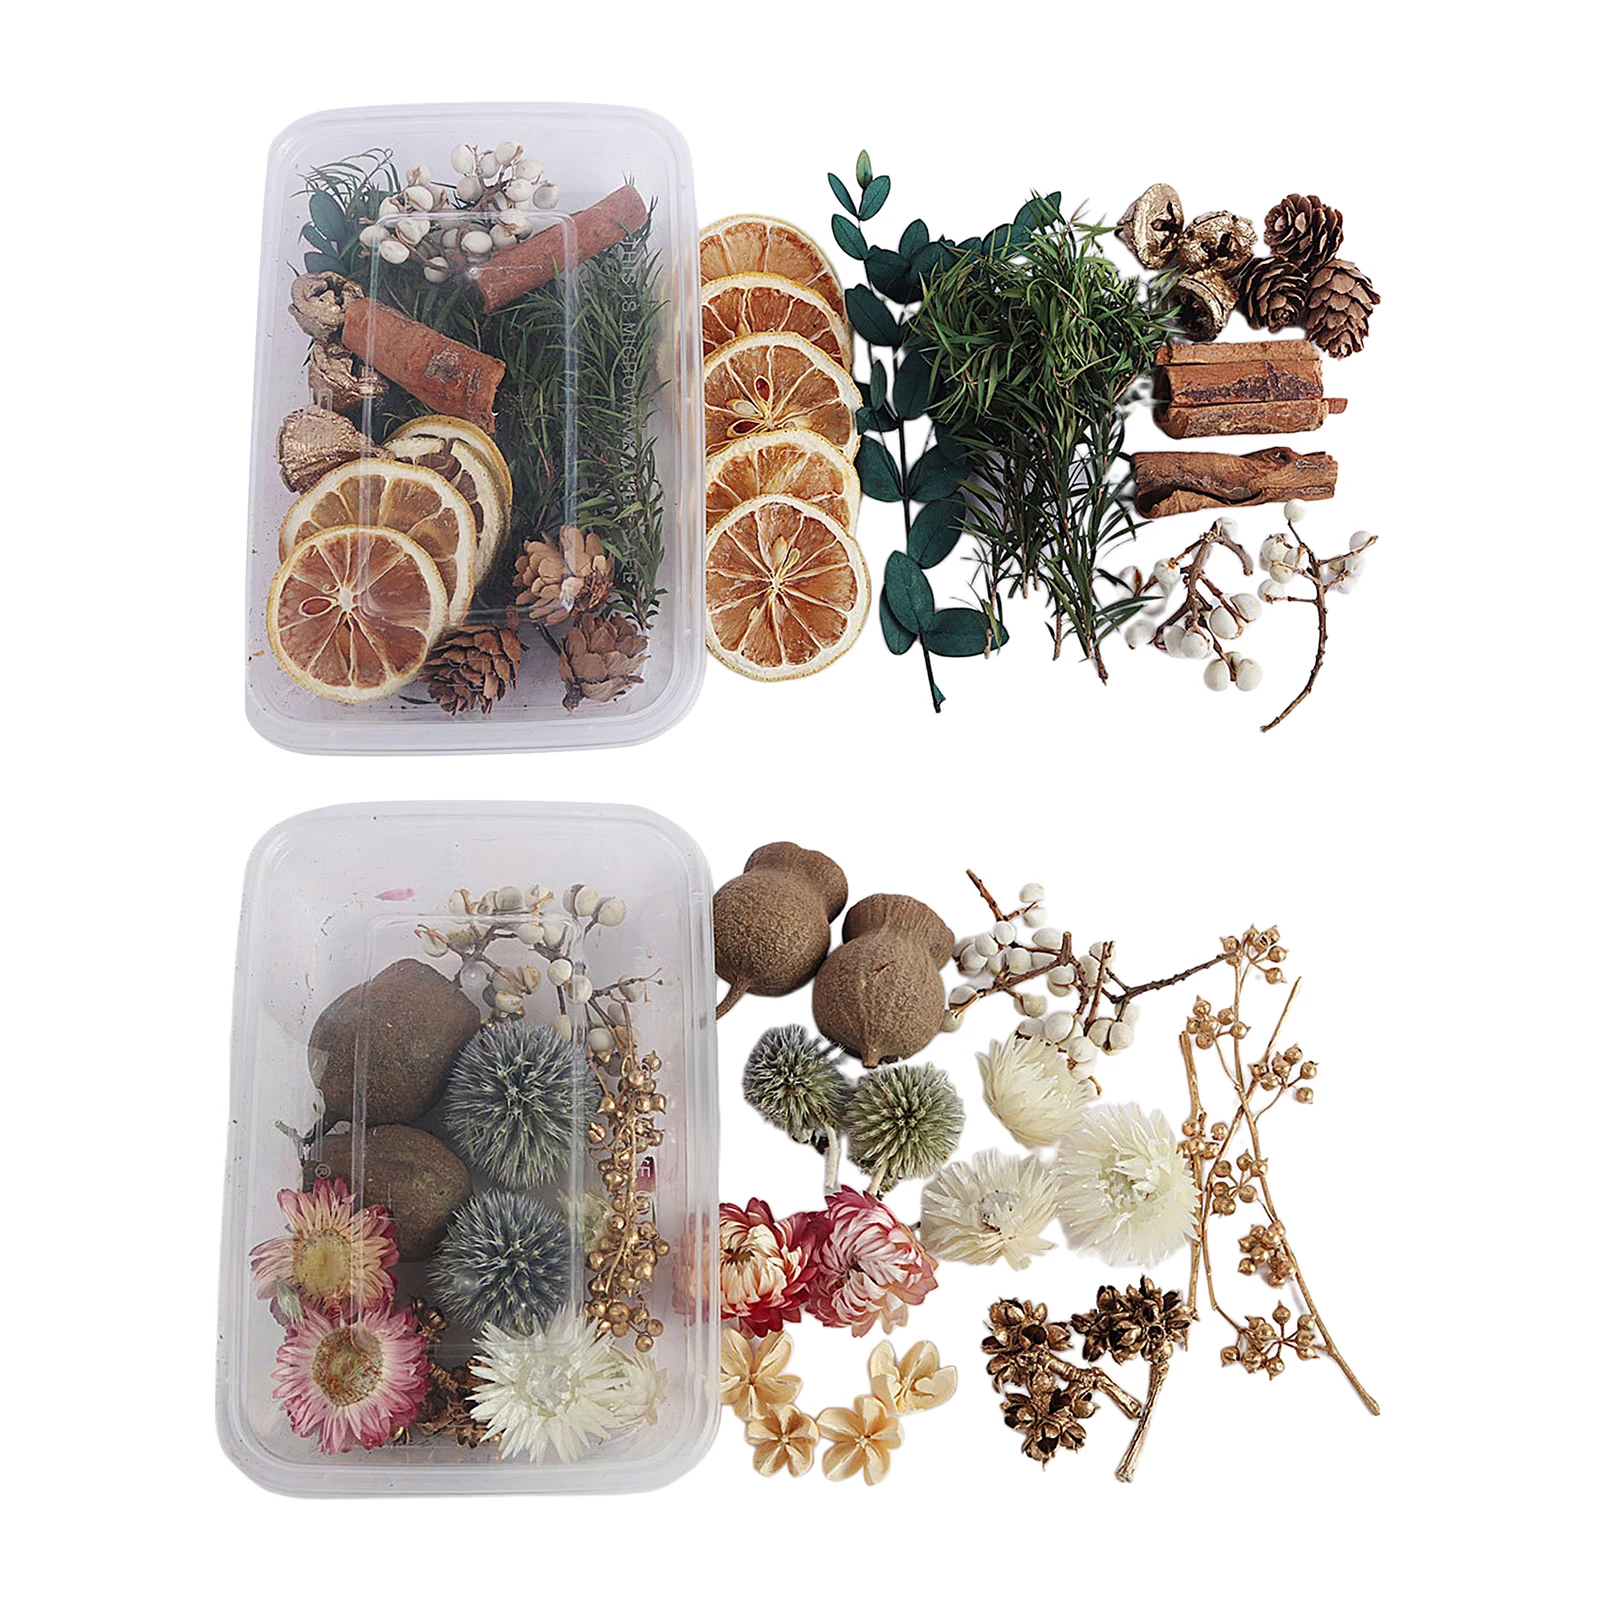 2 Boxes Real Natural Real Pressed Dried Flowers Petals Plants for Making Greeting Card, DIY Phone Case, Jewelry Craft